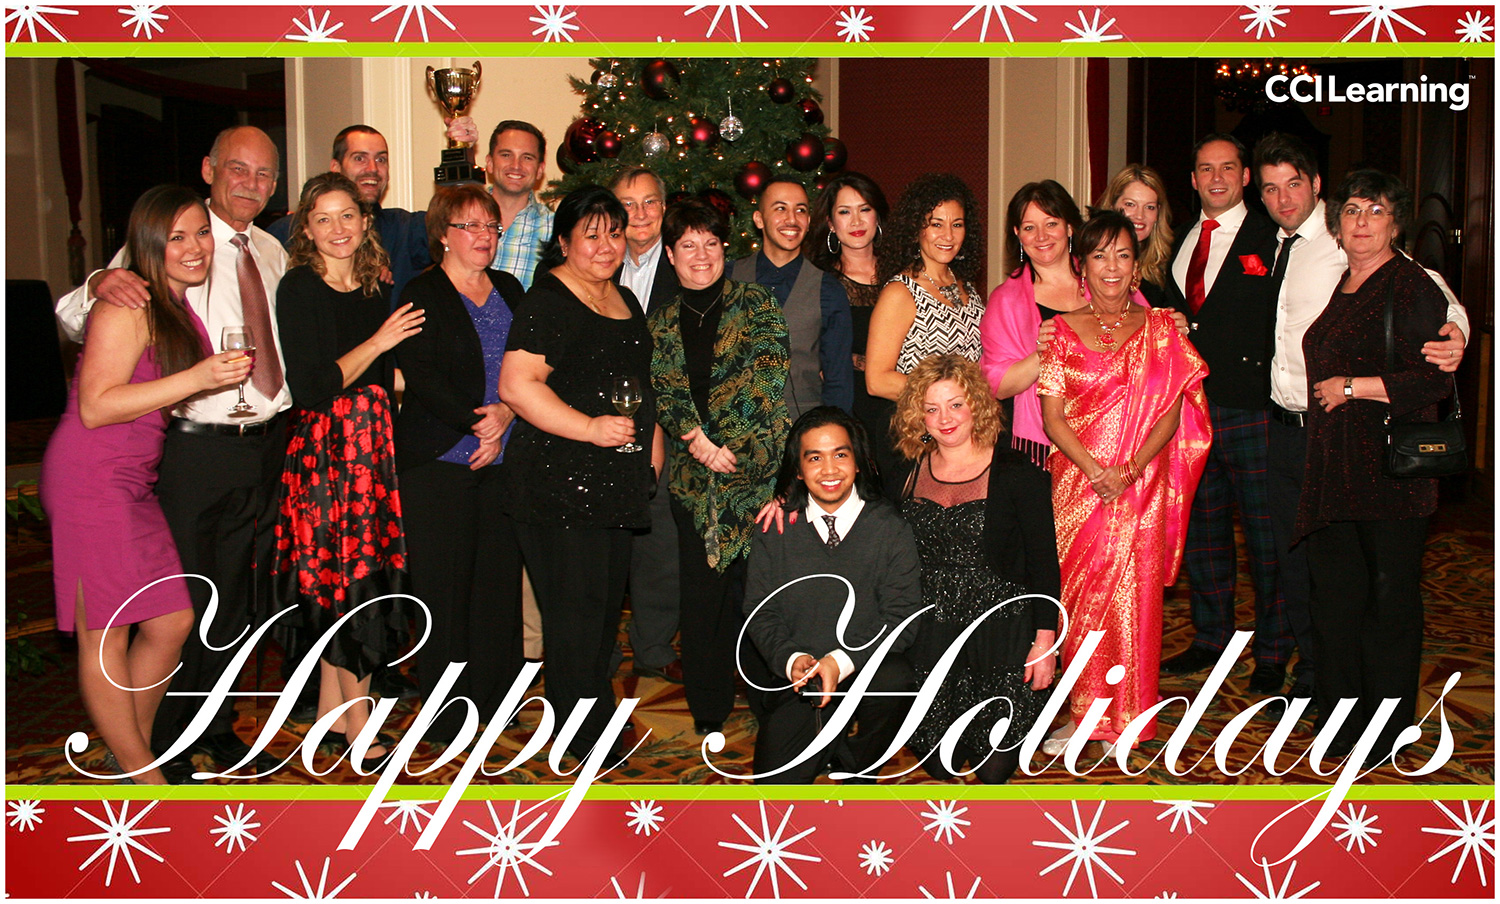 Happy Holidays from CCI Learning